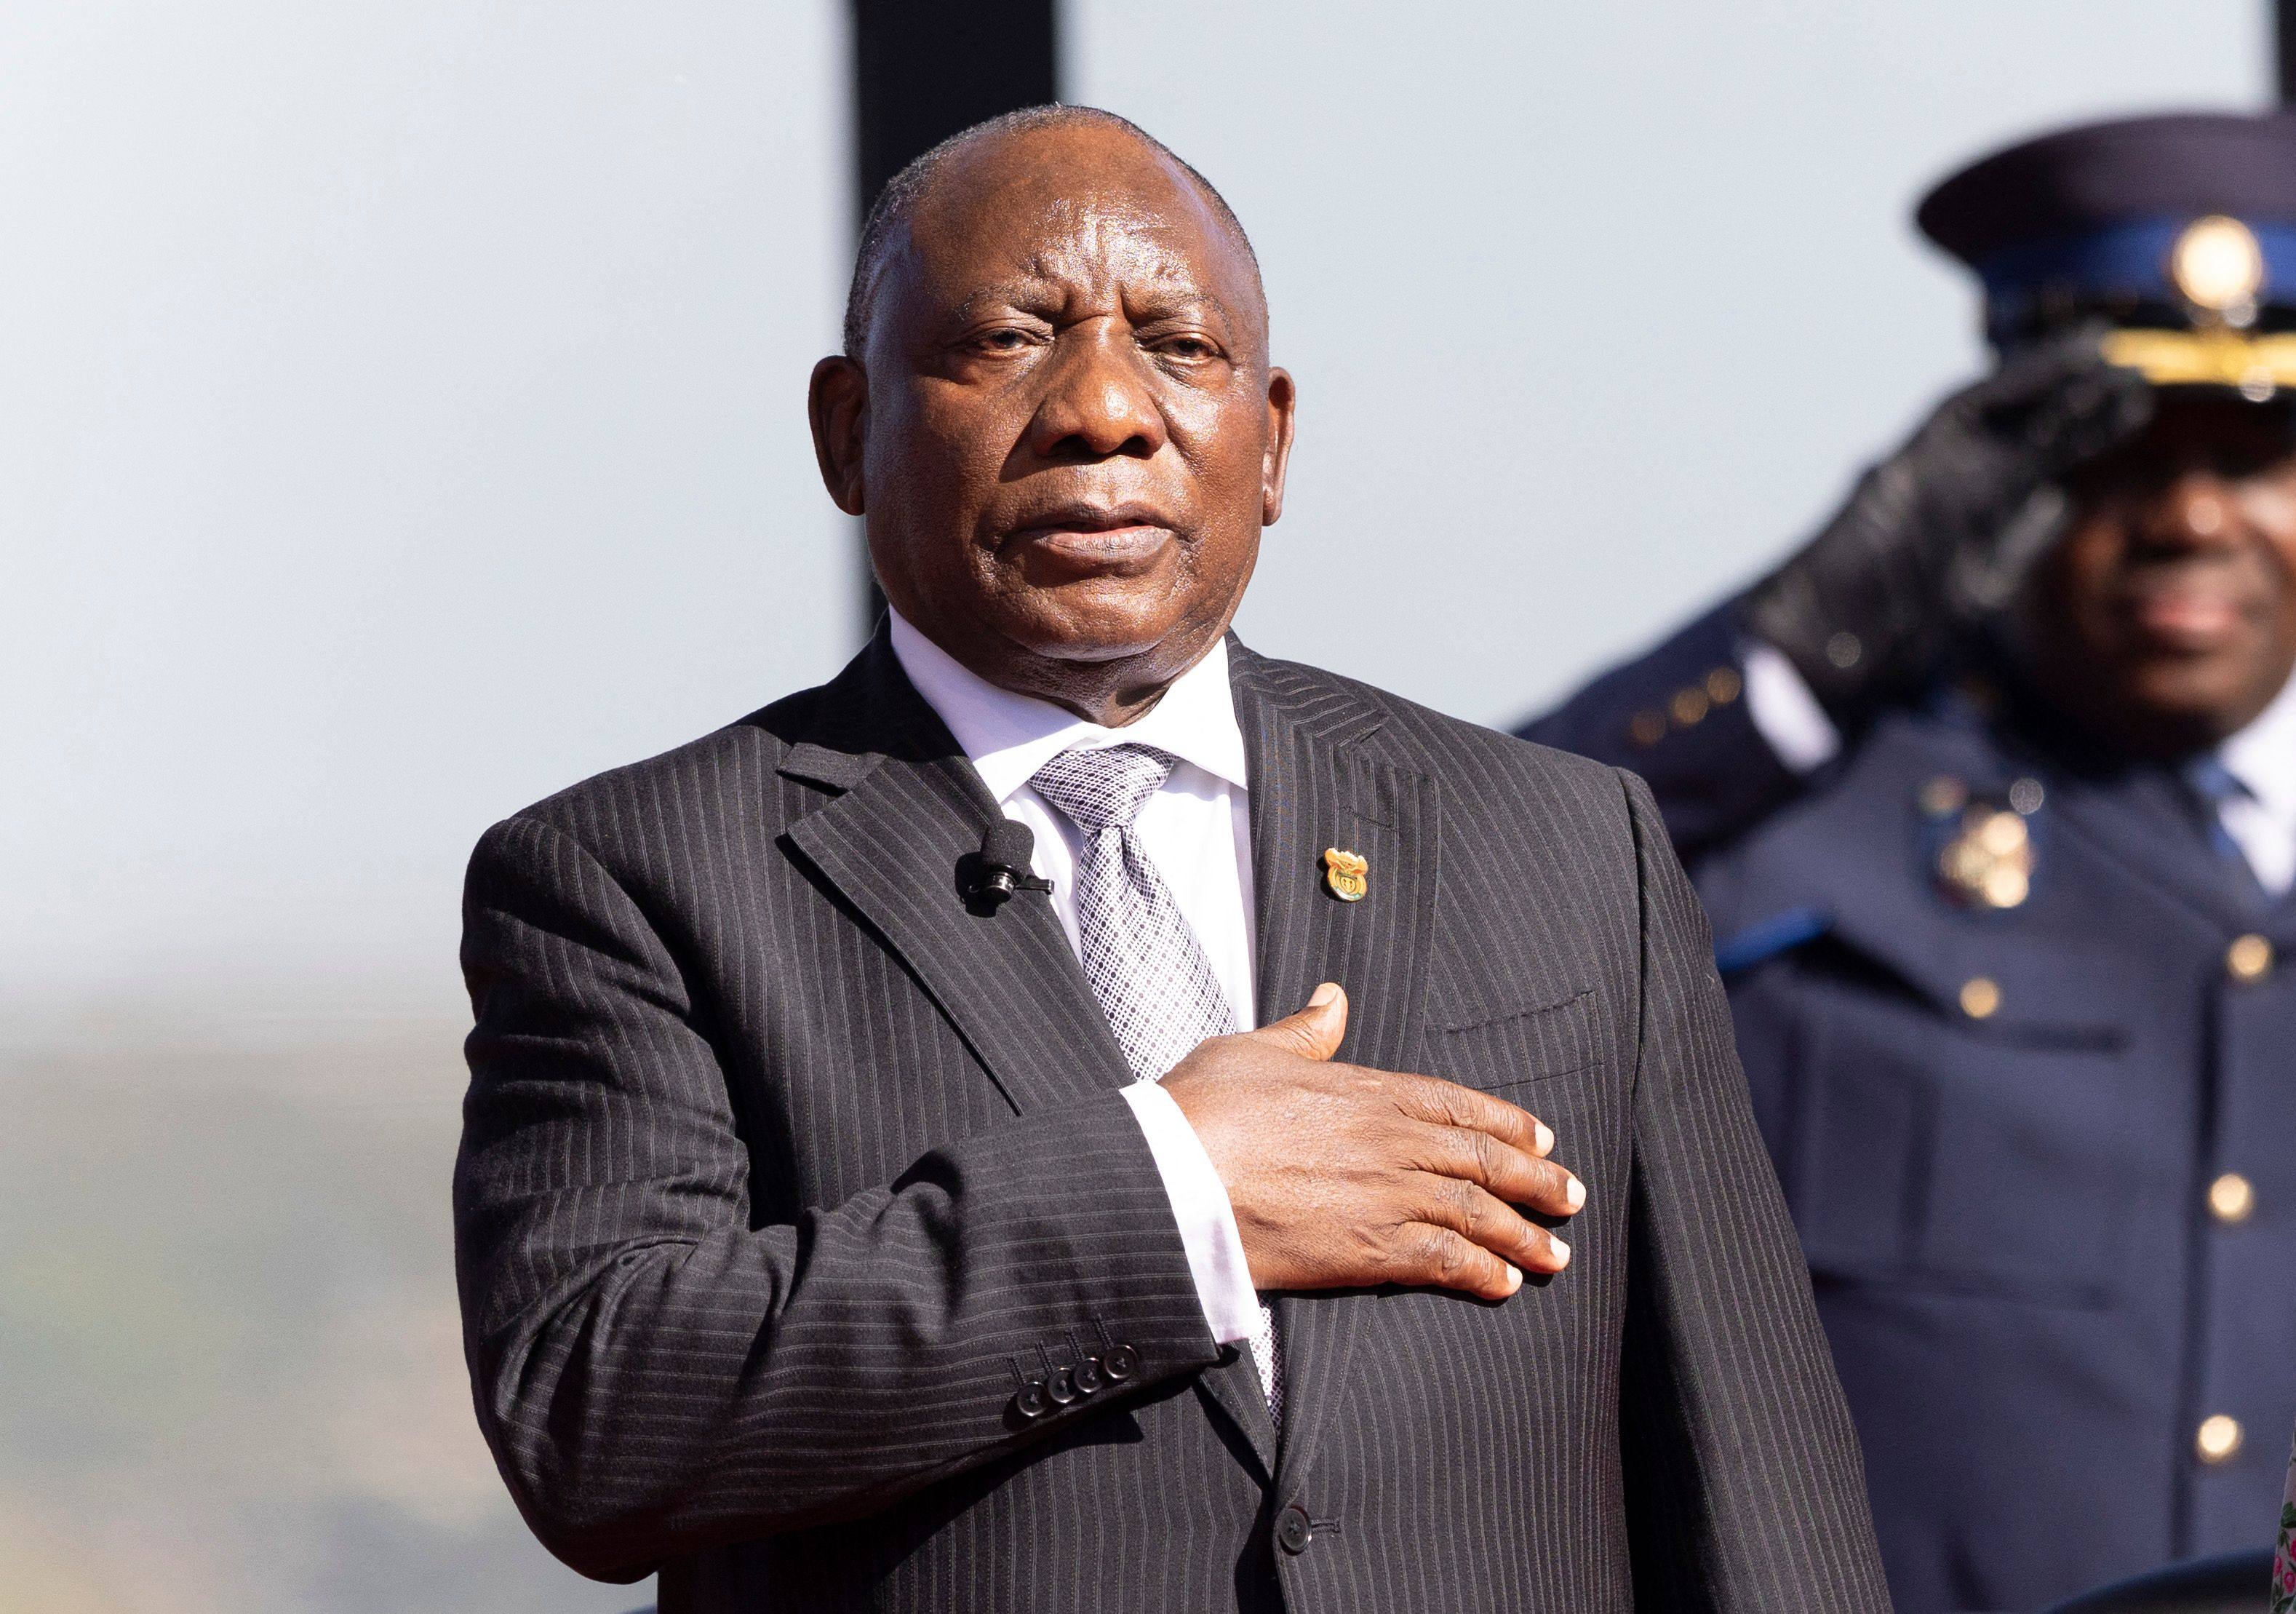 South Africa’s Cyril Ramaphosa being sworn in for a second term as president last month. Photo: AFP